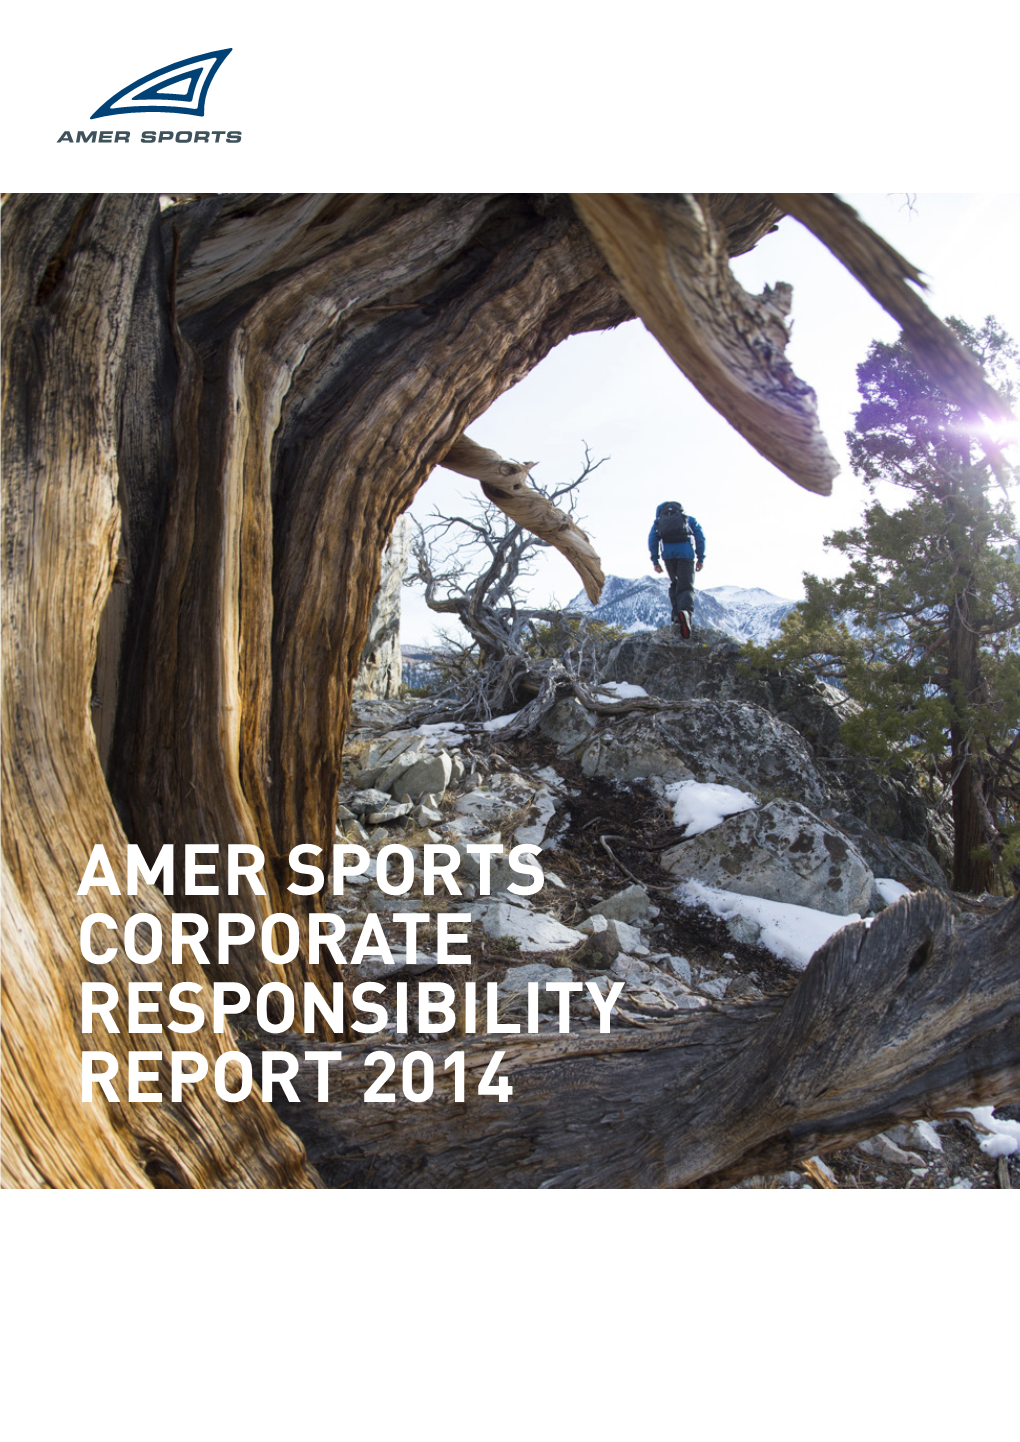 AMER SPORTS CORPORATE RESPONSIBILITY REPORT 2014 Amer Sports Sustainability and Business